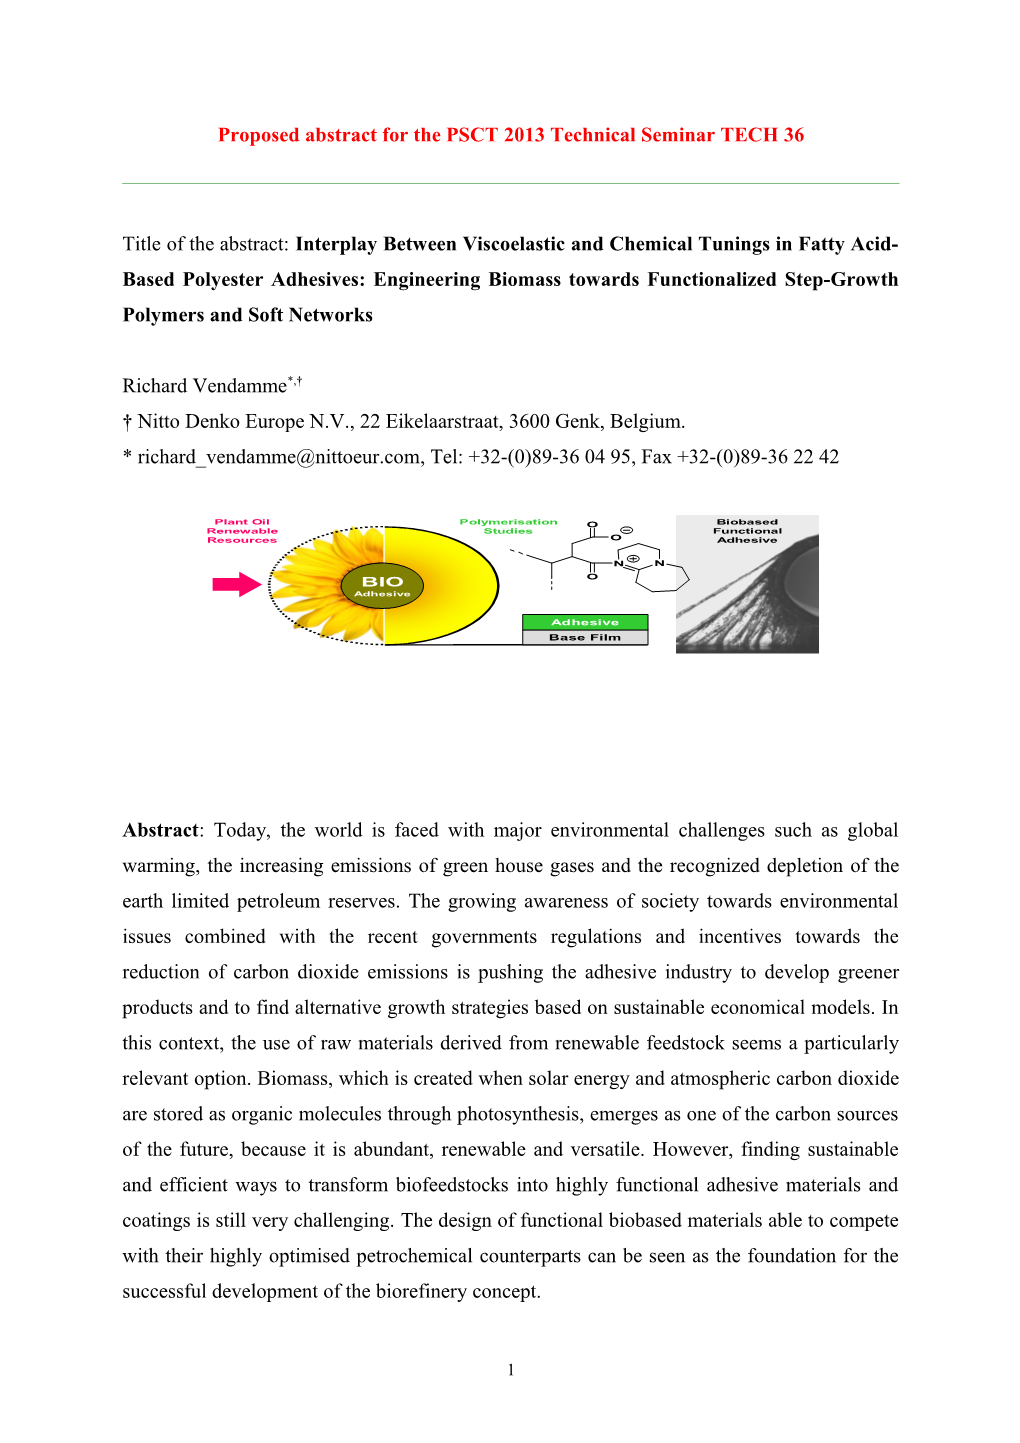 Synthesis and Adhesive Properties of Soft, Biobased Elastomers Derived from Dimerized Fatty